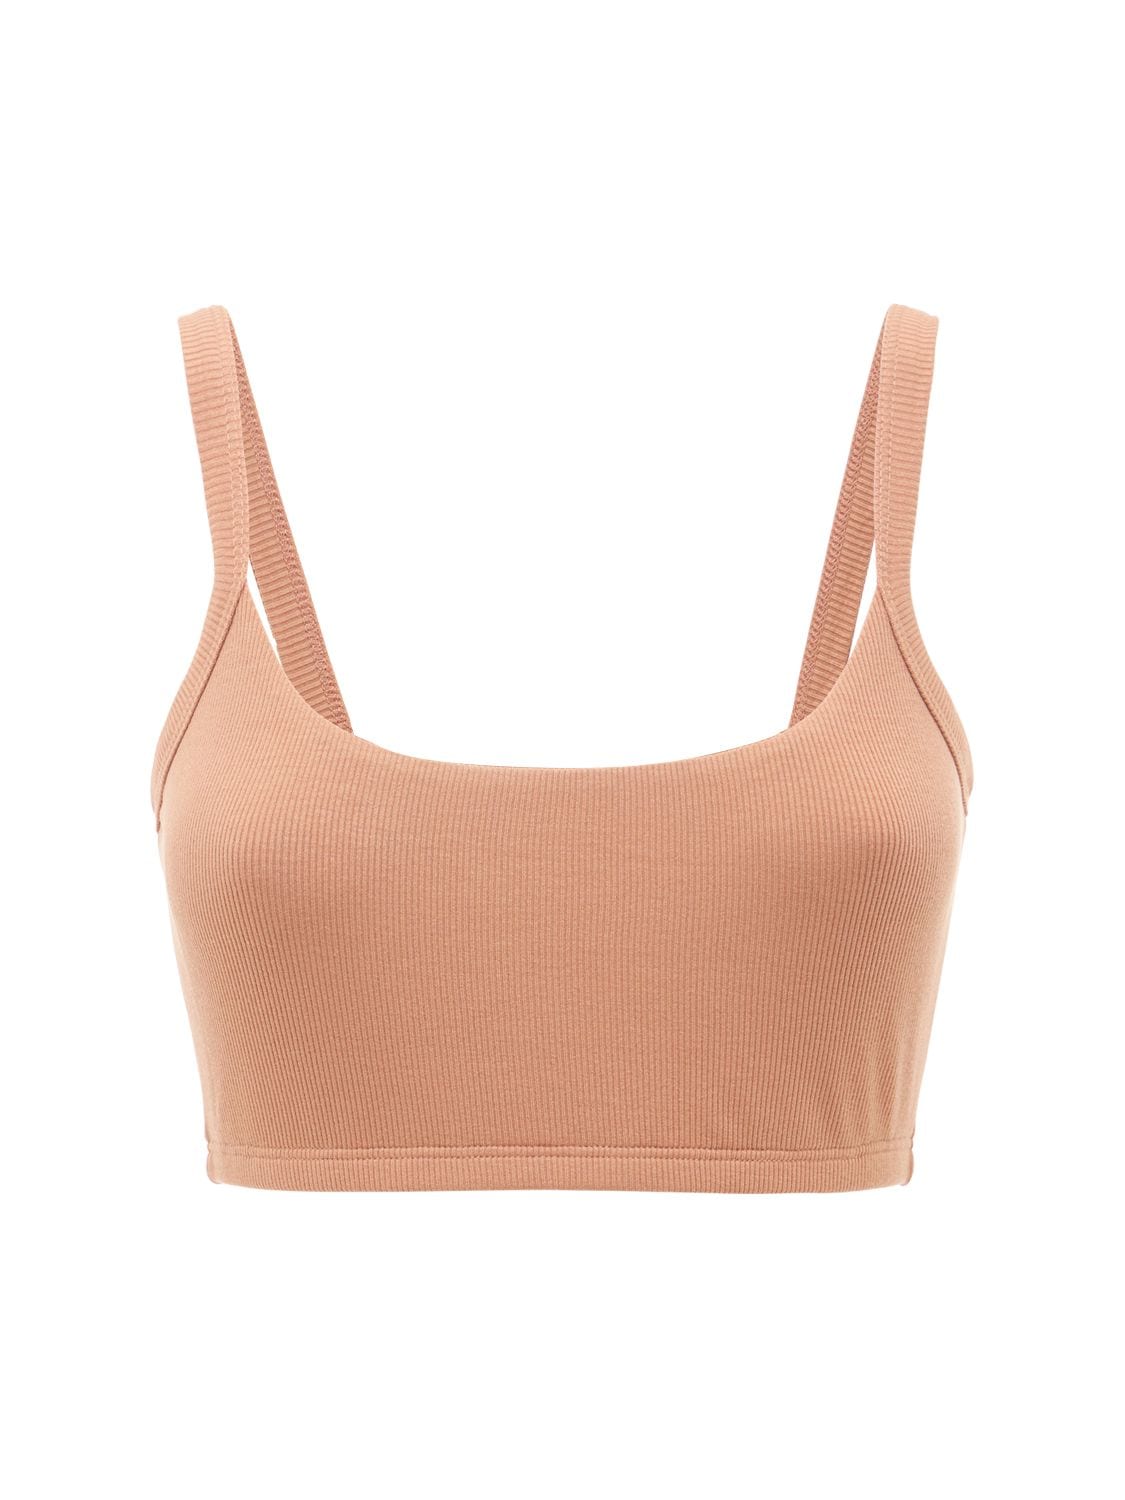 YEAR OF OURS SOFT BRALETTE,73IE7D022-TU9DSEE1